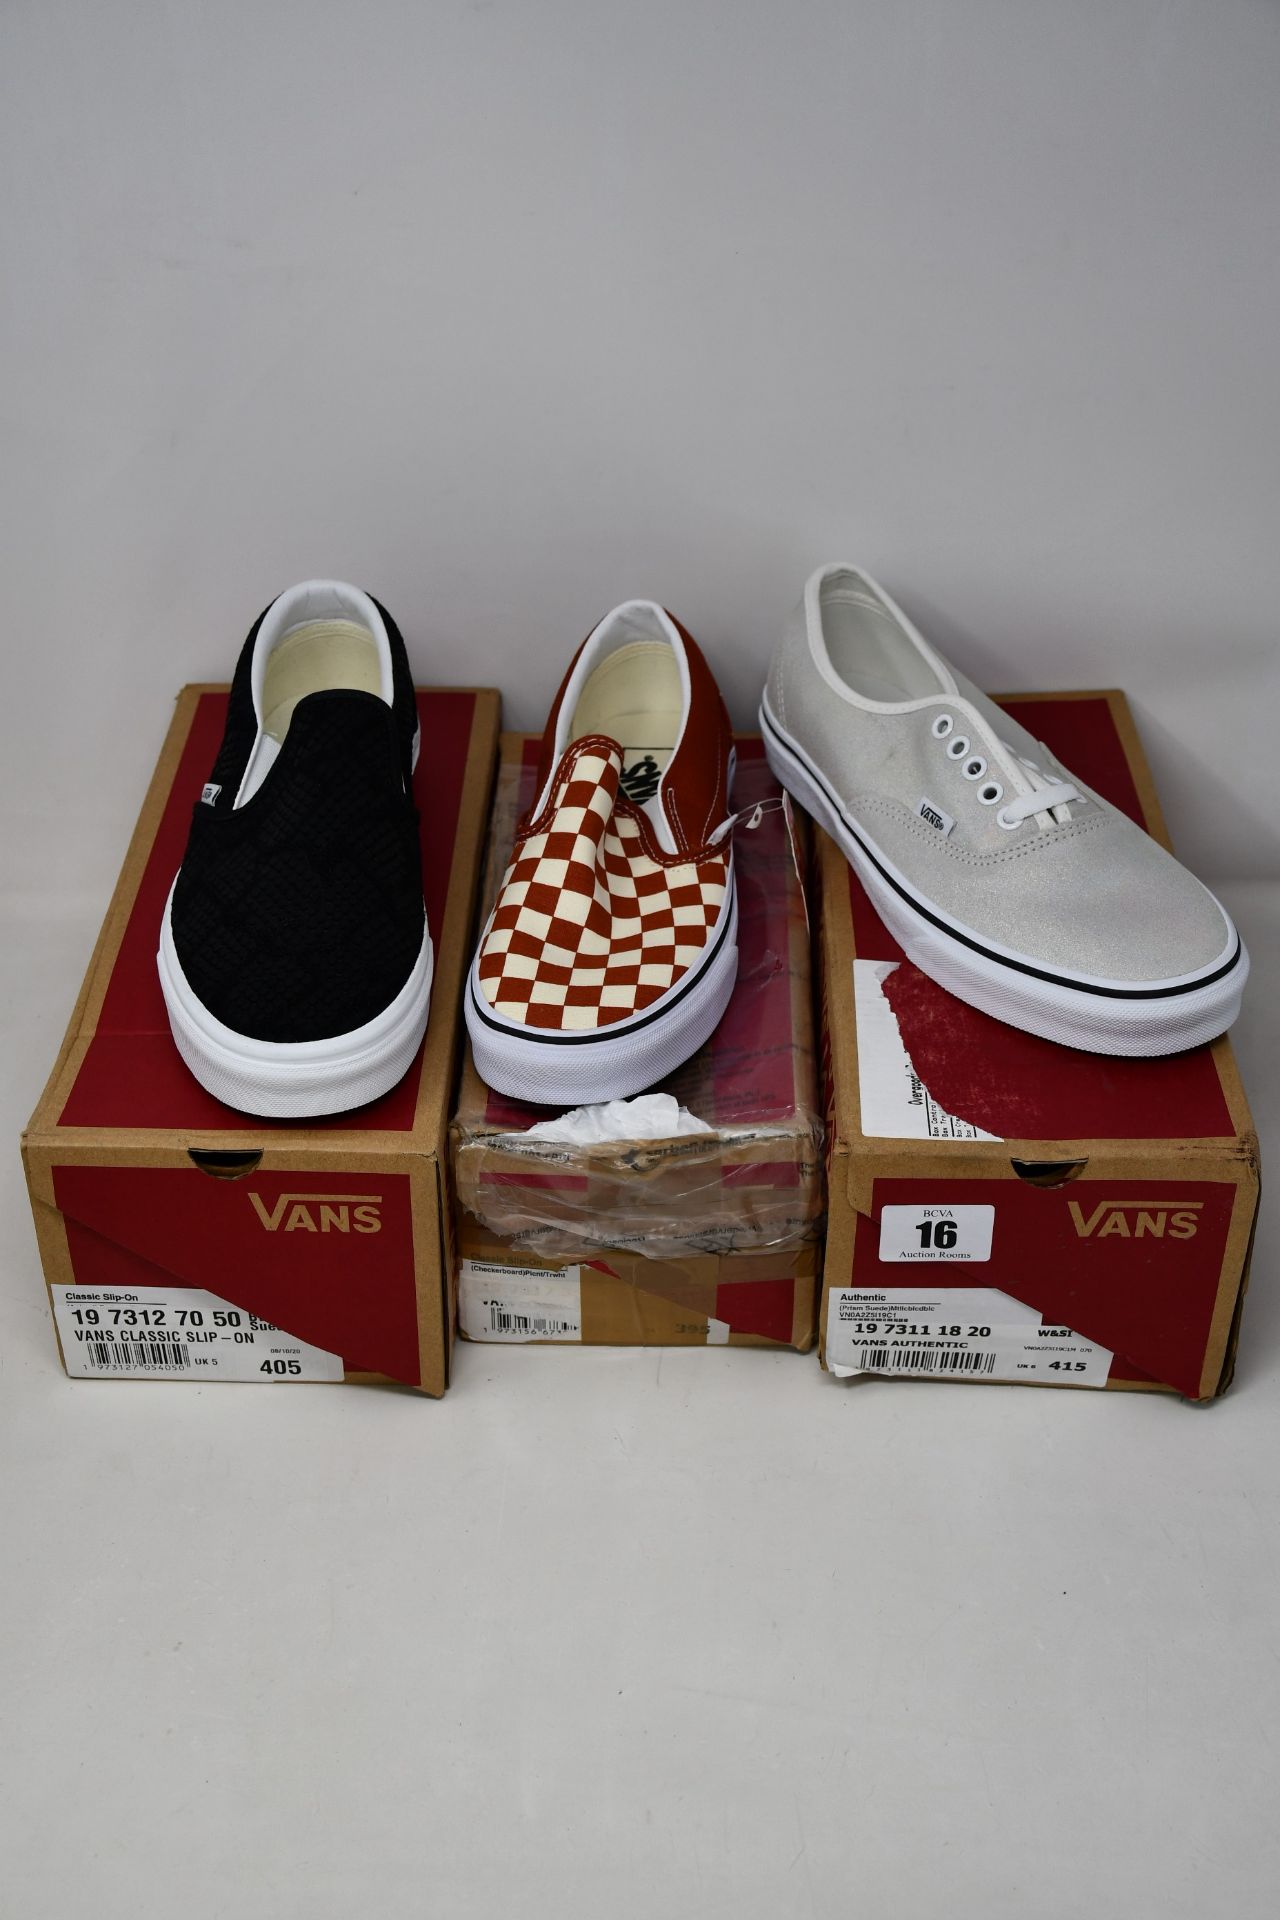 Two pairs of as new Vans Classic Slip-On canvas shoes (UK 4, 5) and a pair of Vans Authentic (UK